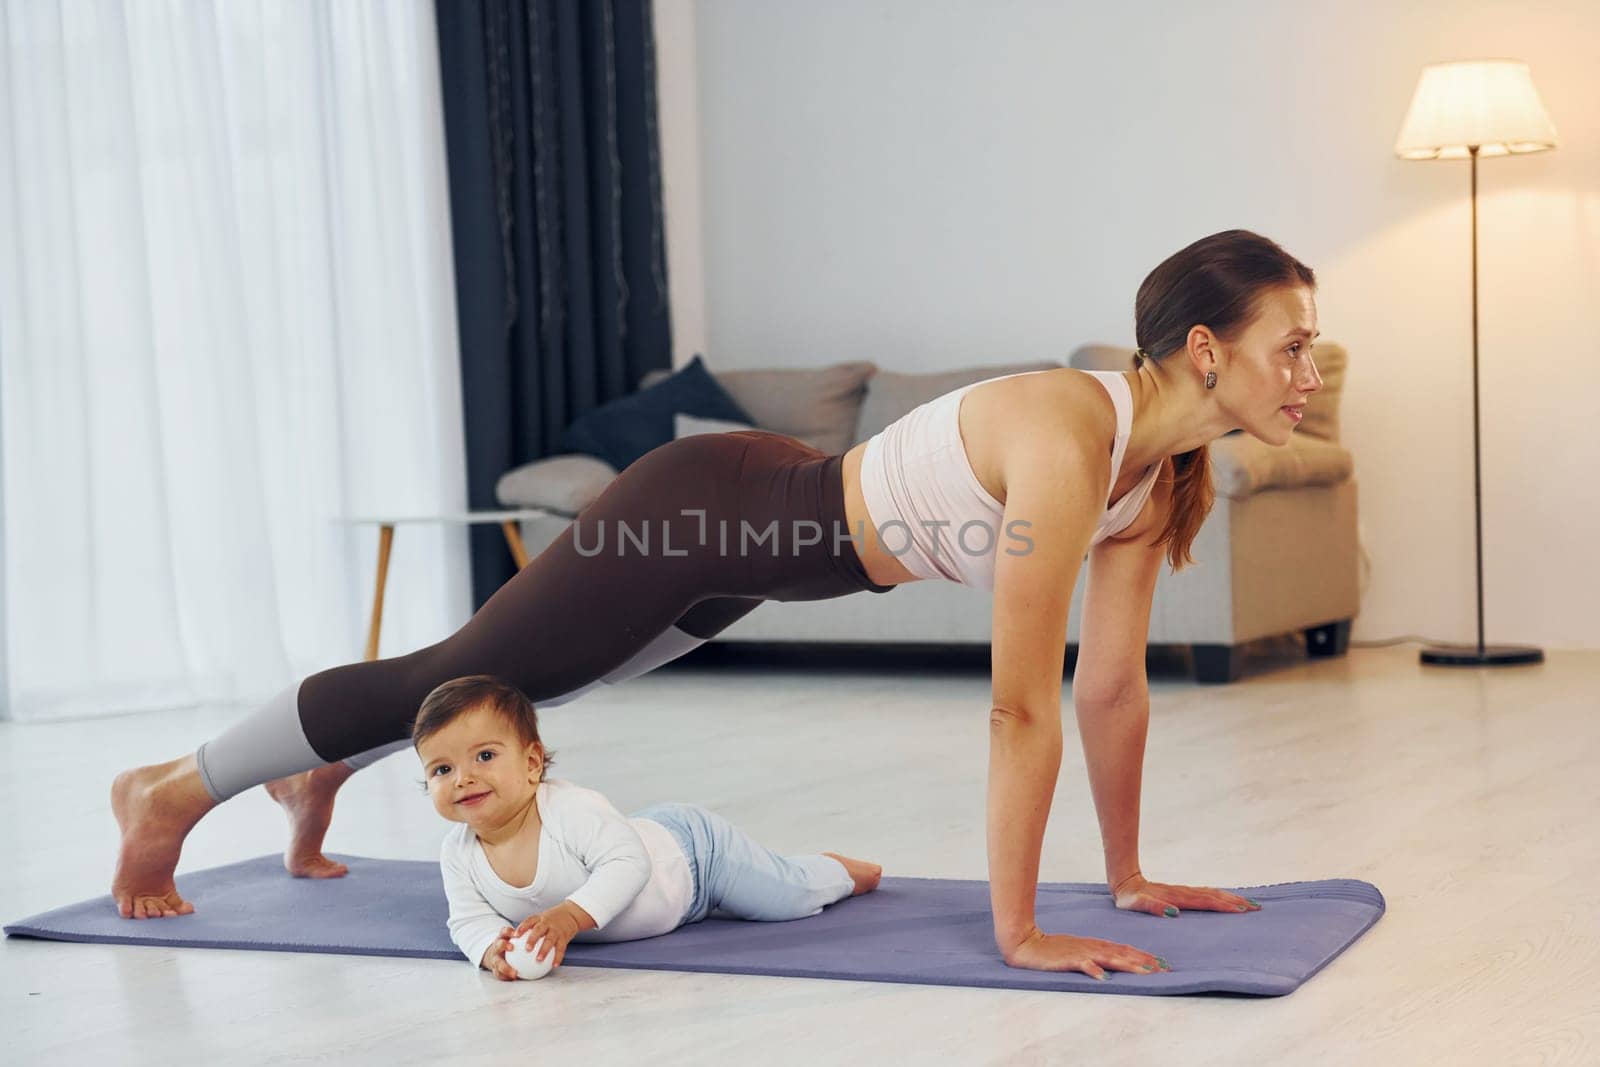 Doing exercises on the mat. Mother with her little daughter is at home together.